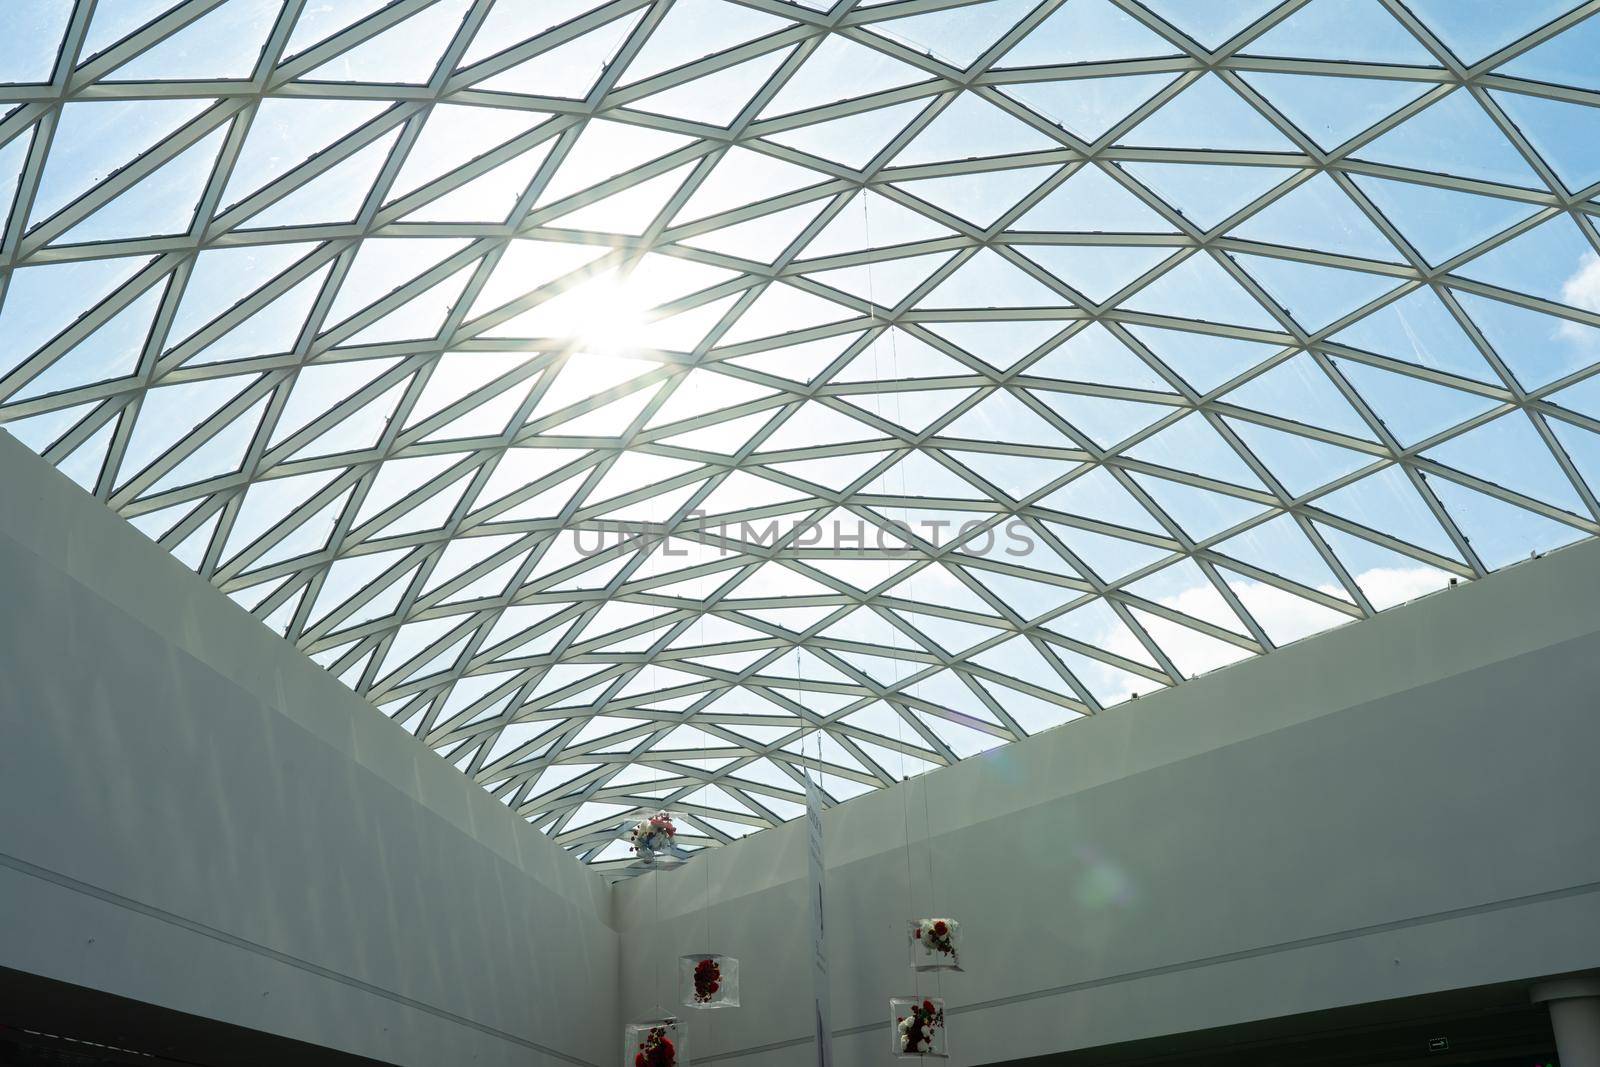 Transparent glass roof of a modern shopping center with sunlight